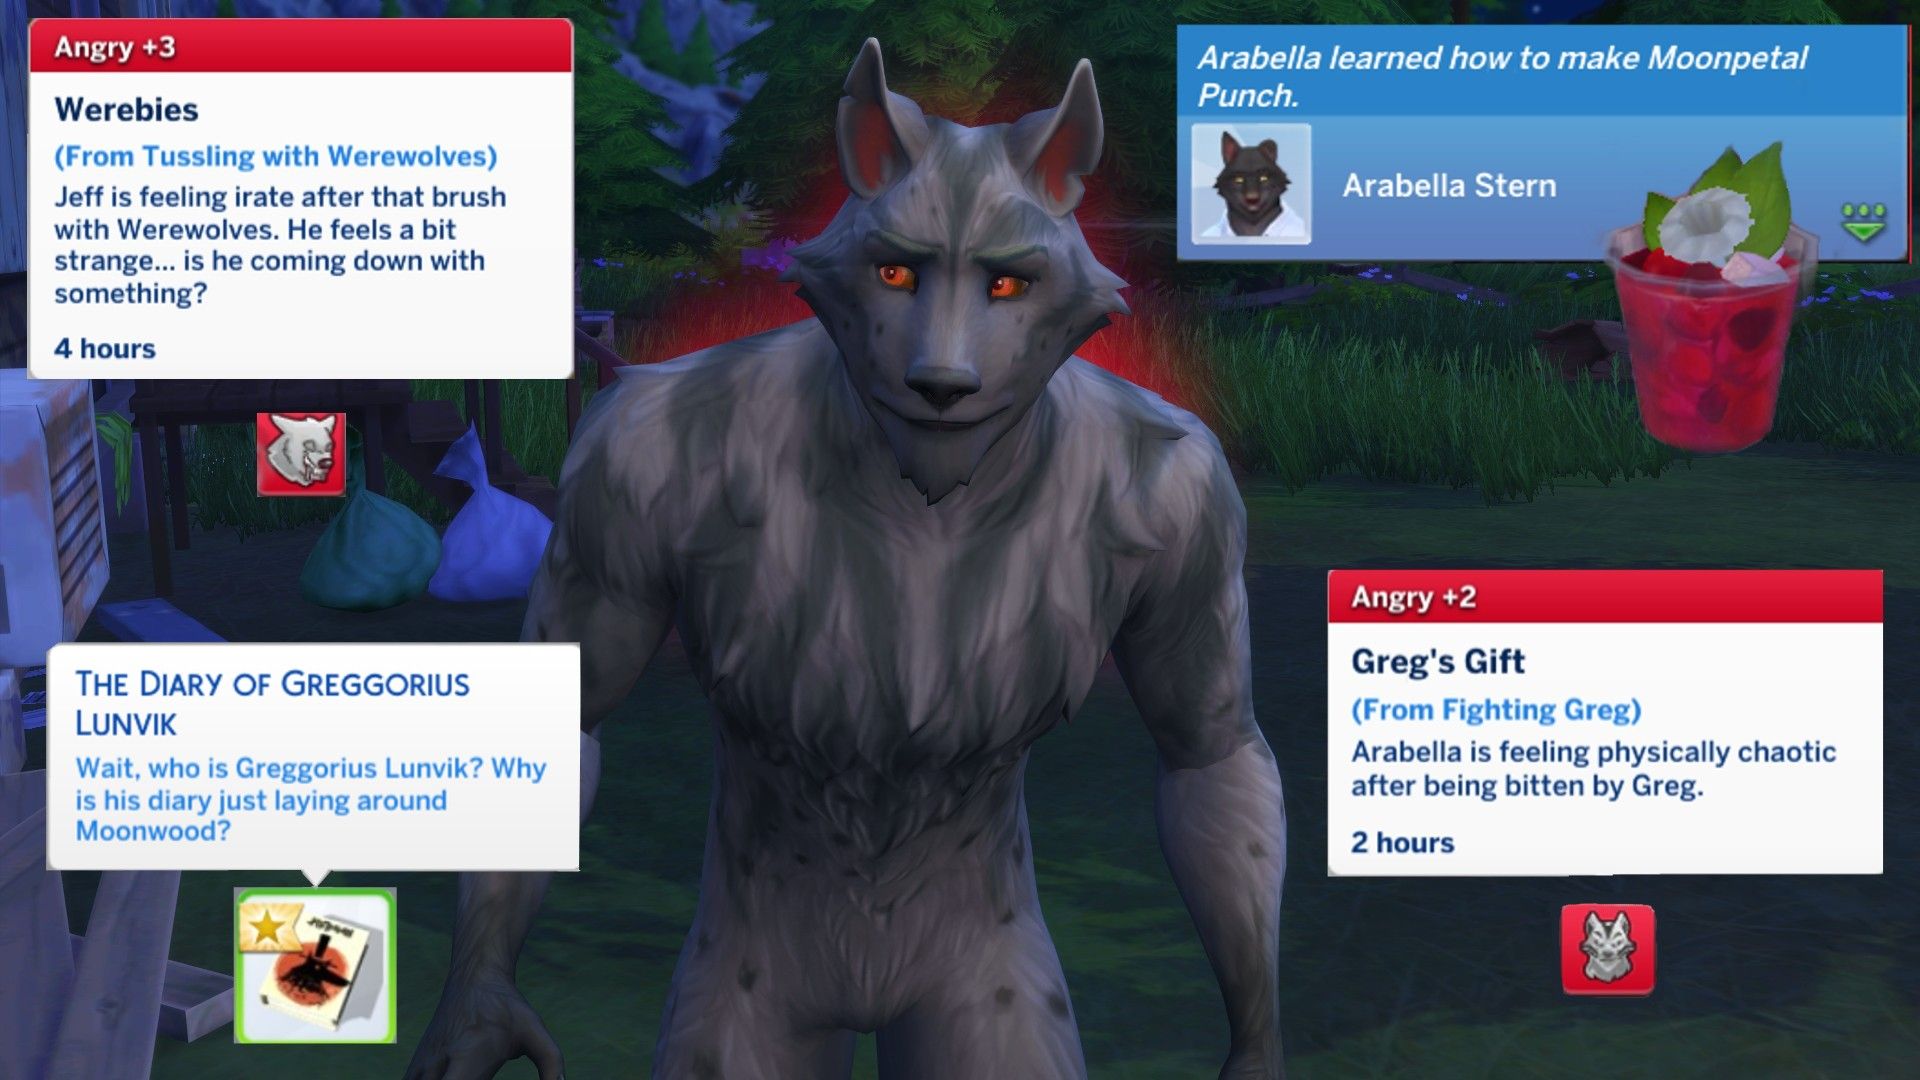 Greg the wolf, moonpetal punch, and some of the lore attached to him in The Sims 4 Werewolves